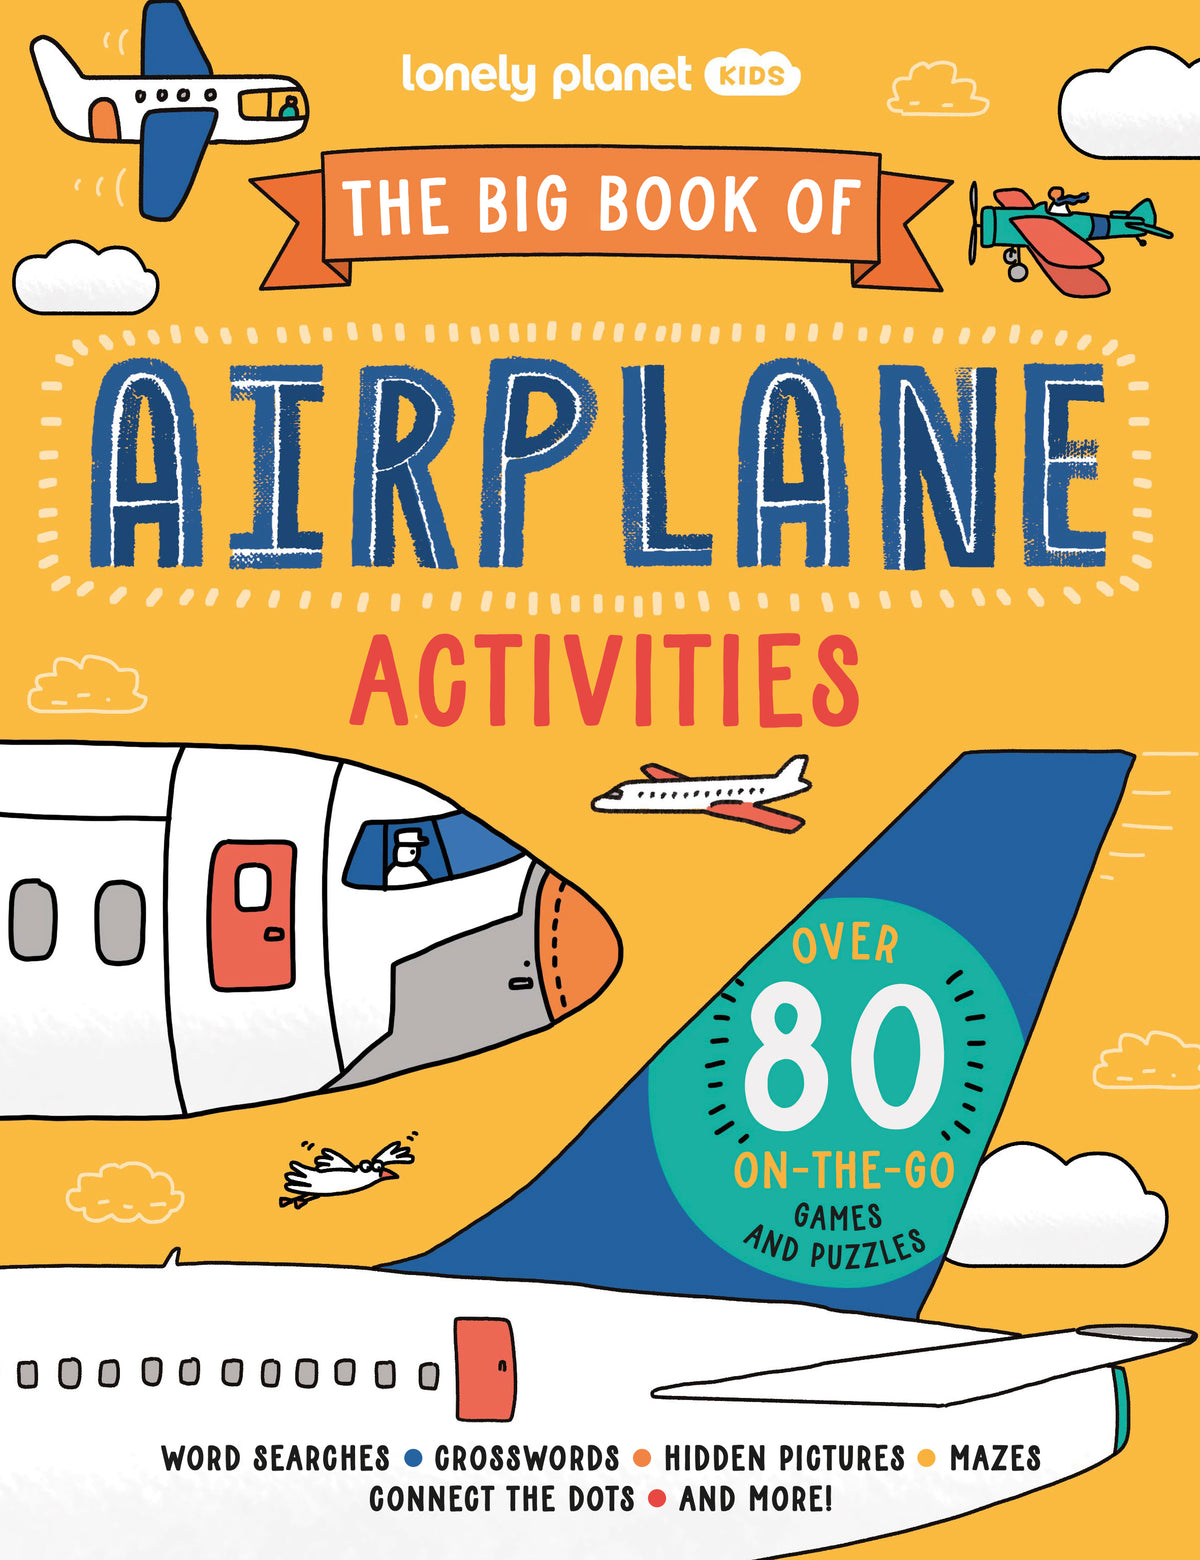 The Big Book of Airplane Activities